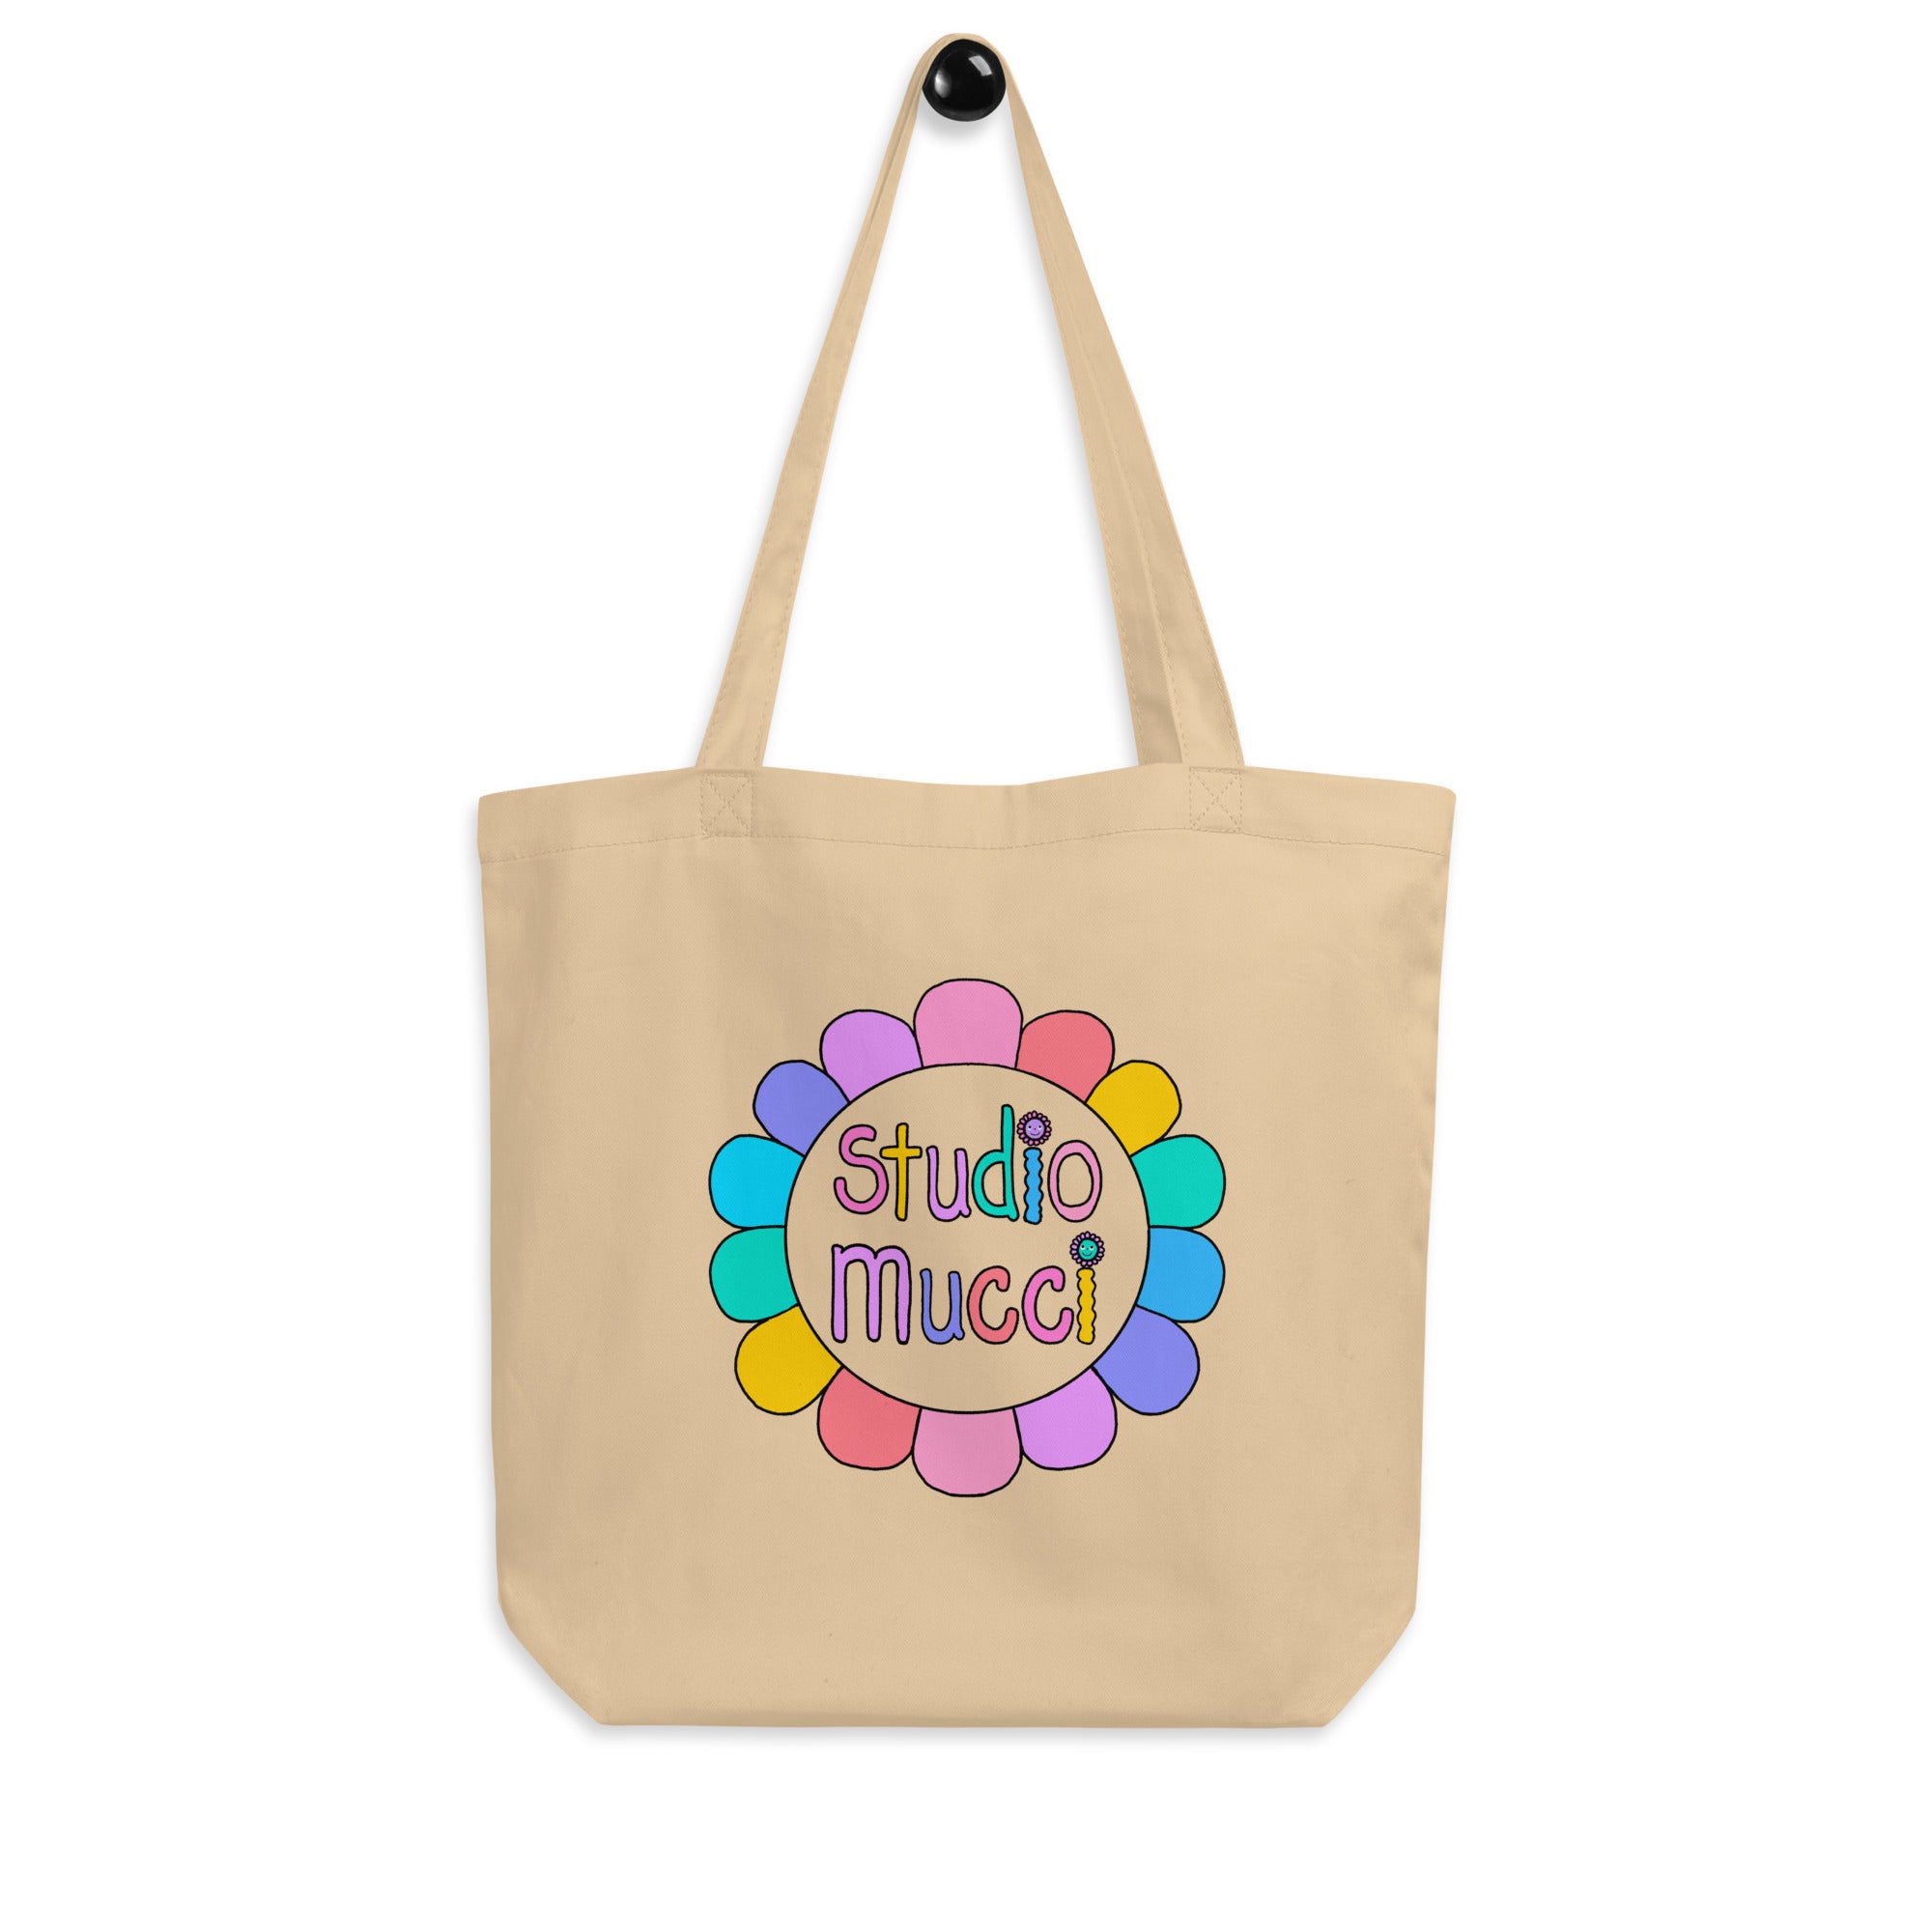 Seeing Myself Cotton Tote